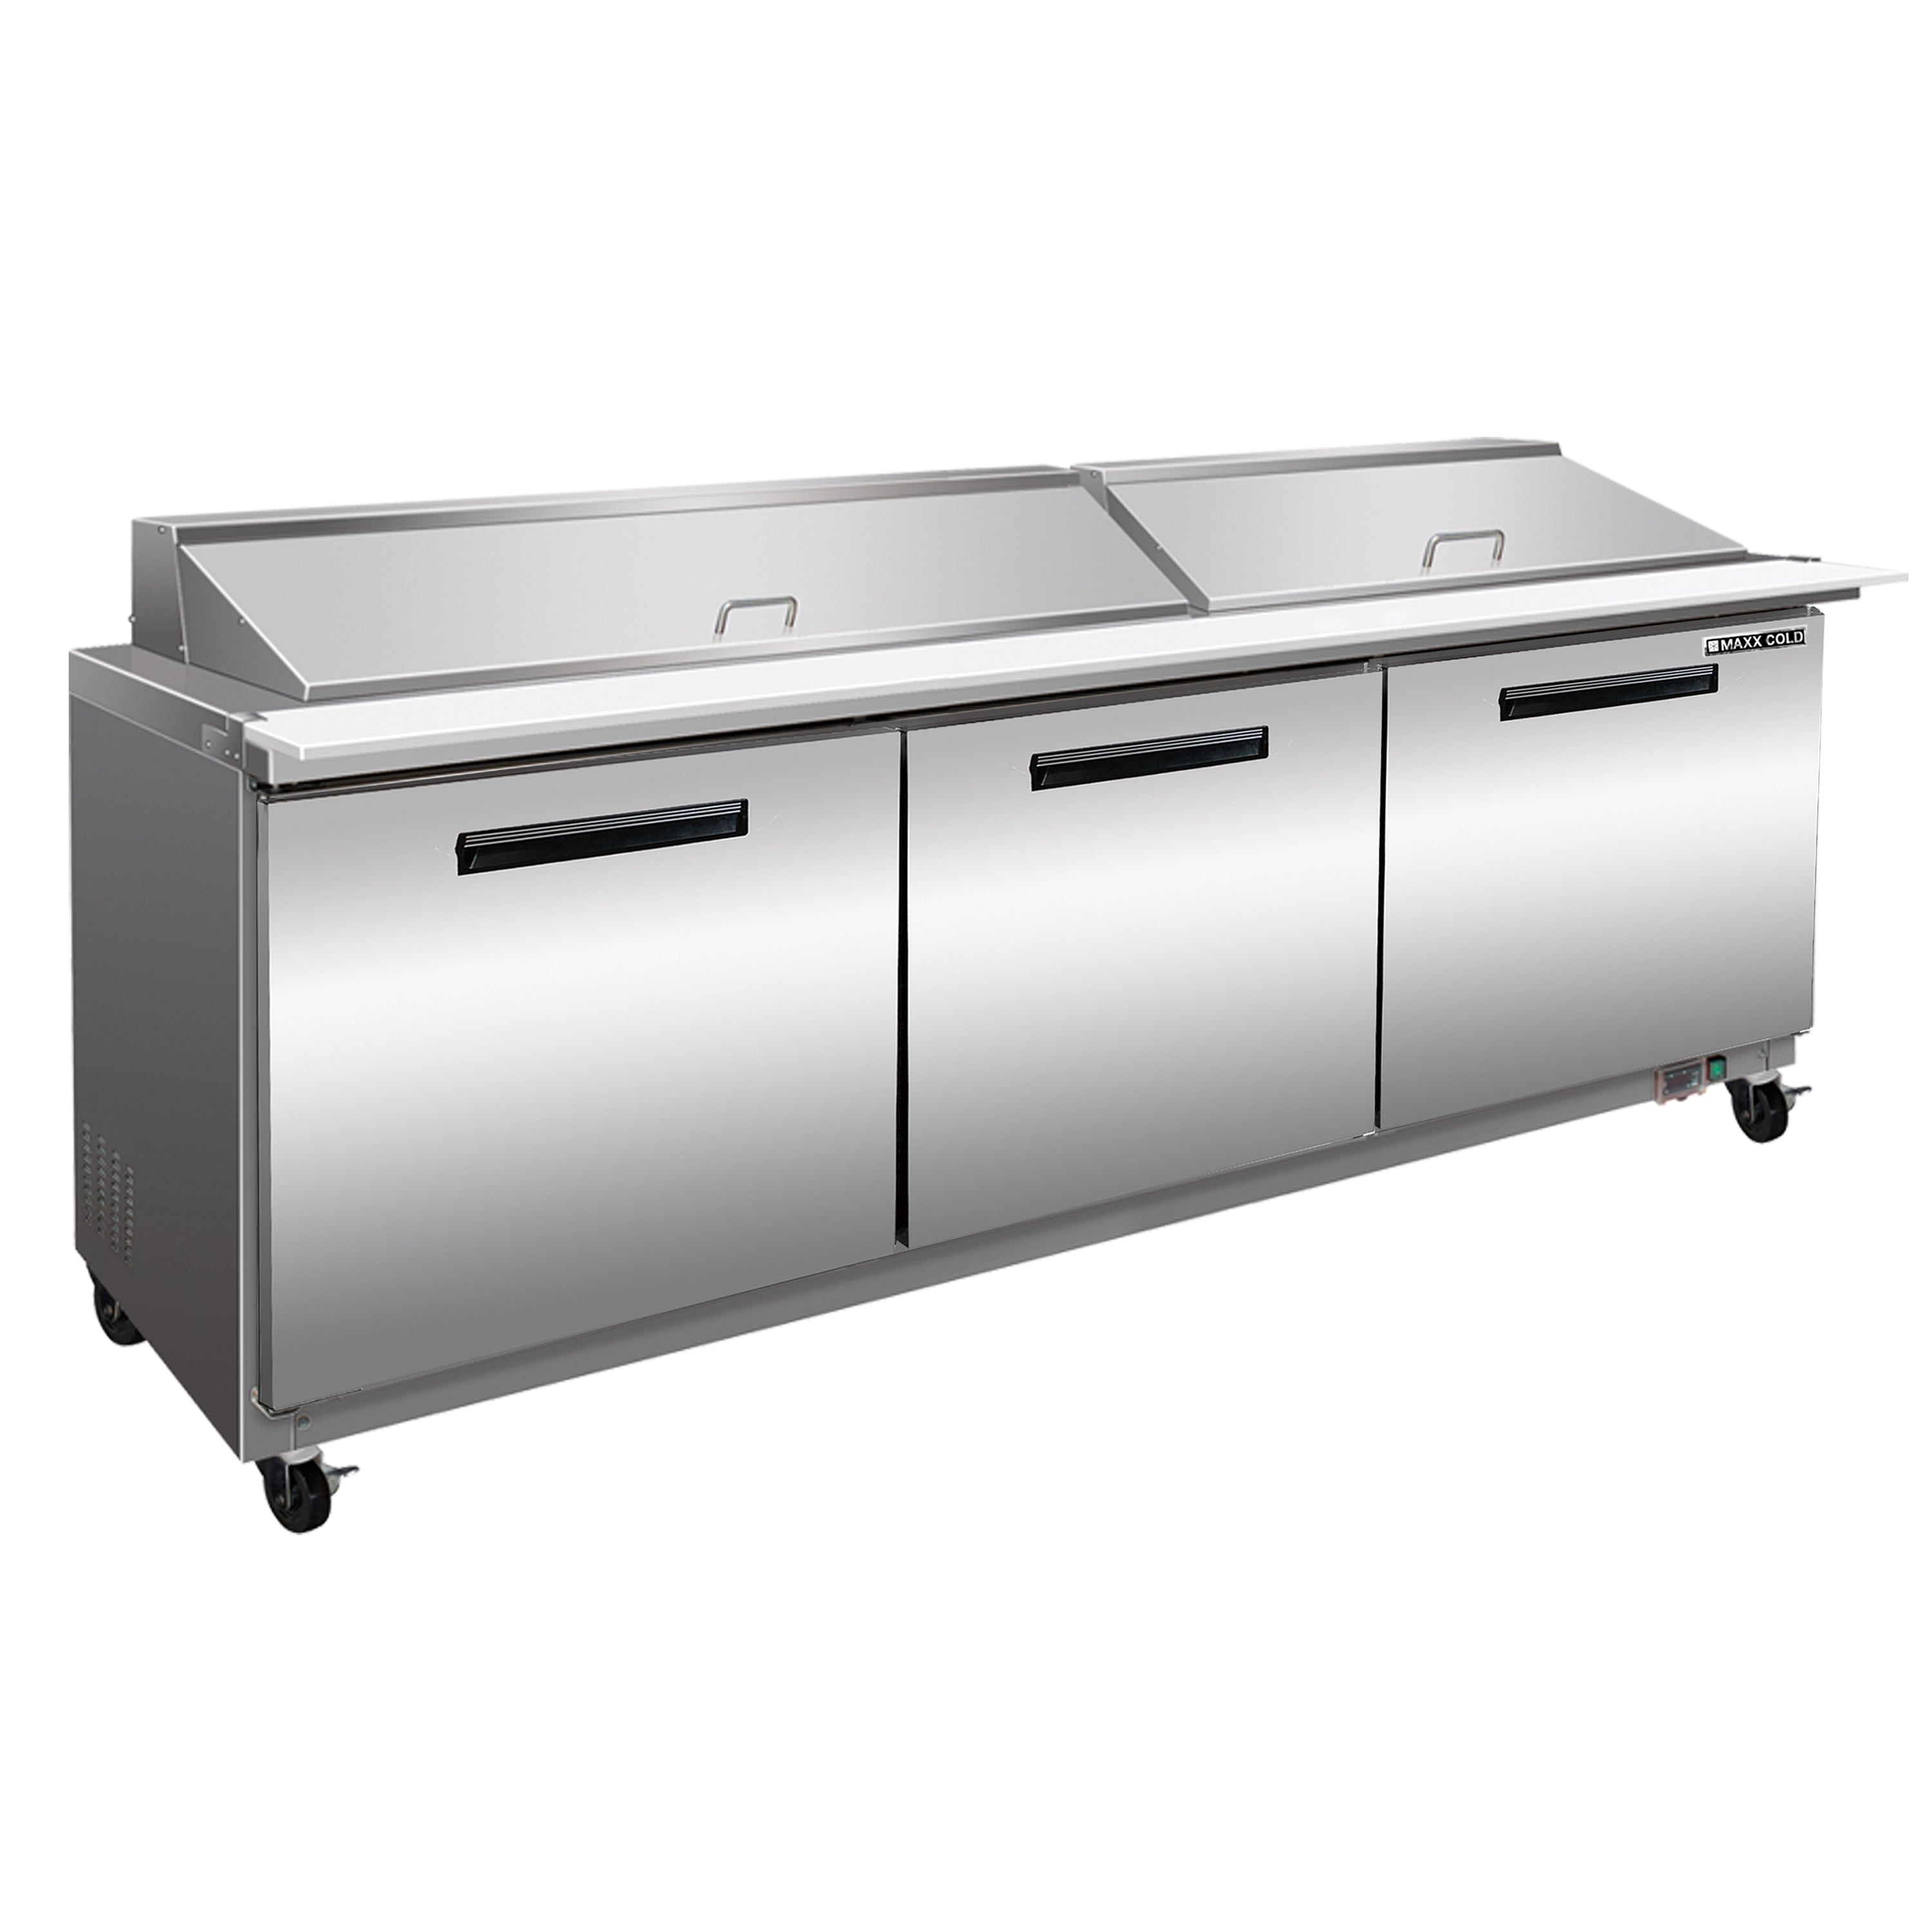 Maxx Cold - MXCR72MHC, Maxx Cold Three-Door Refrigerated Megatop Prep Unit, 72"W, 18 cu. ft. Storage Capacity, Equipped with (27) 4" Deep Pans and Cutting Board, in Stainless Steel